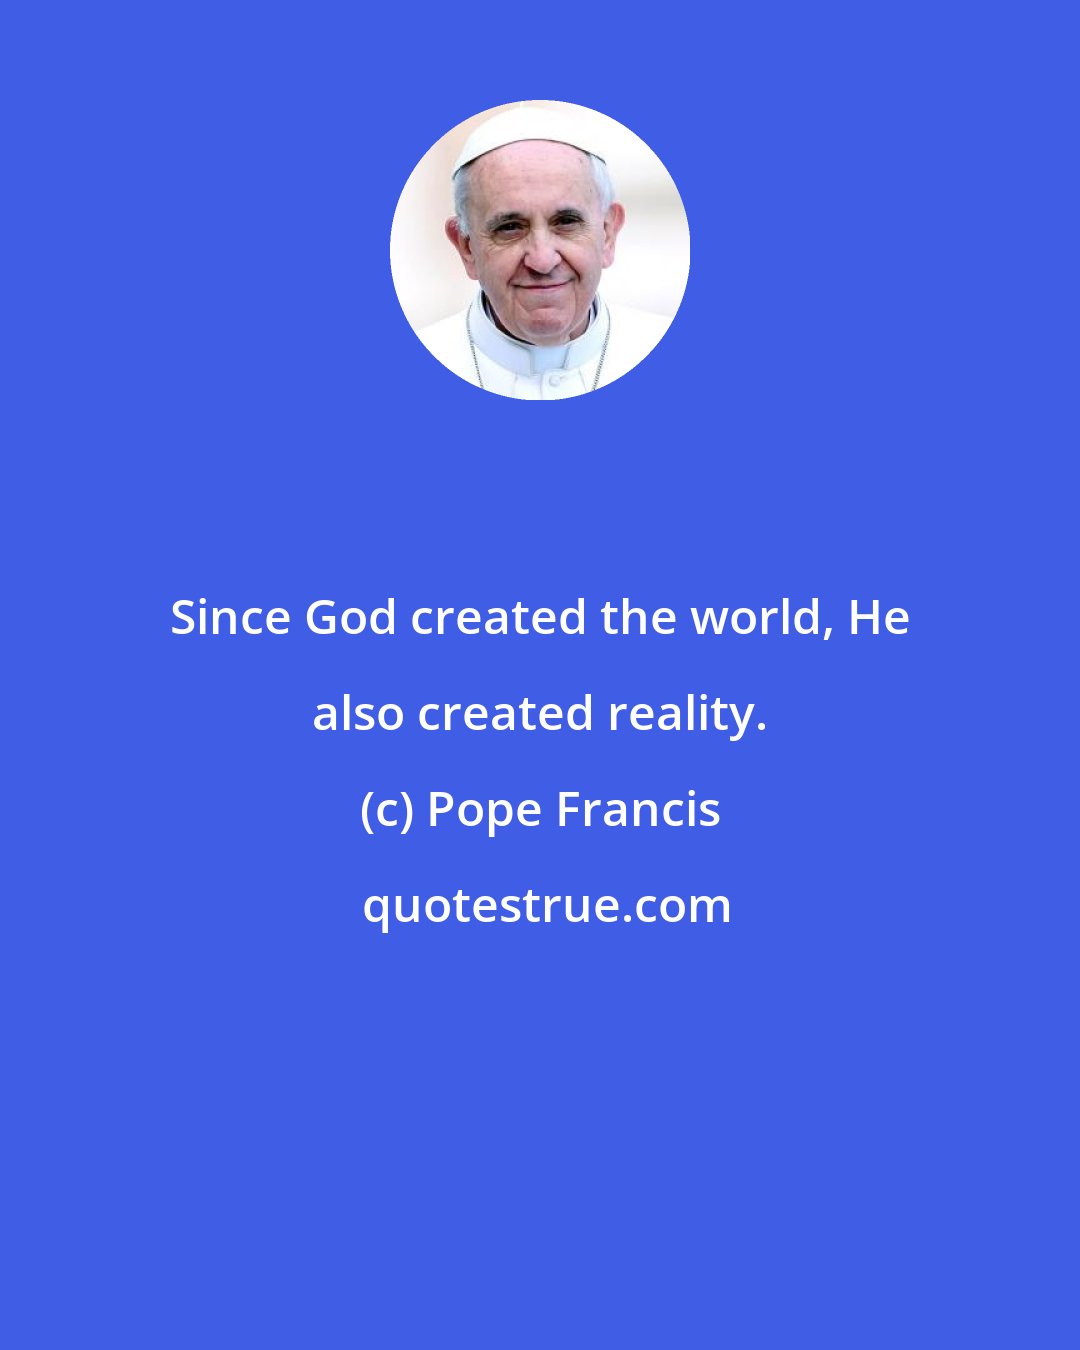 Pope Francis: Since God created the world, He also created reality.